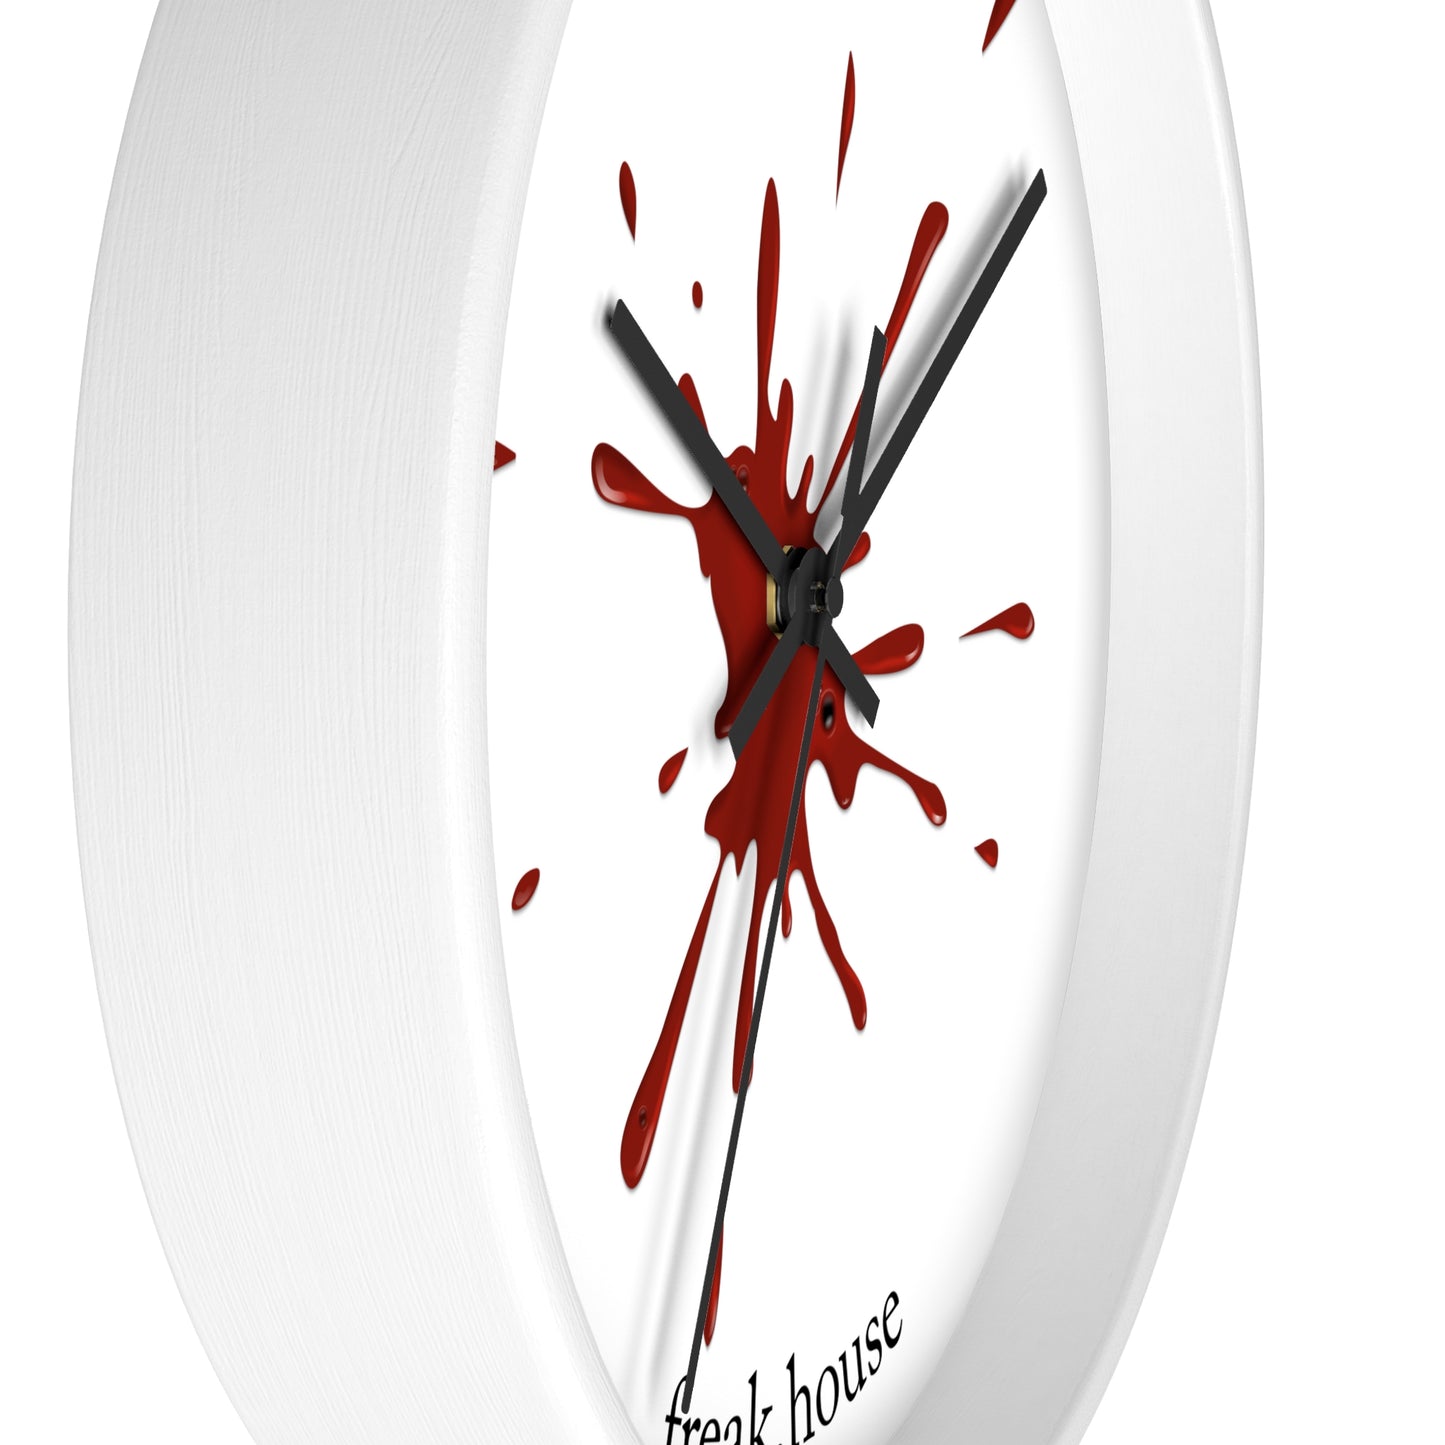 Blood Spatter Wall Clock, Round, White Face